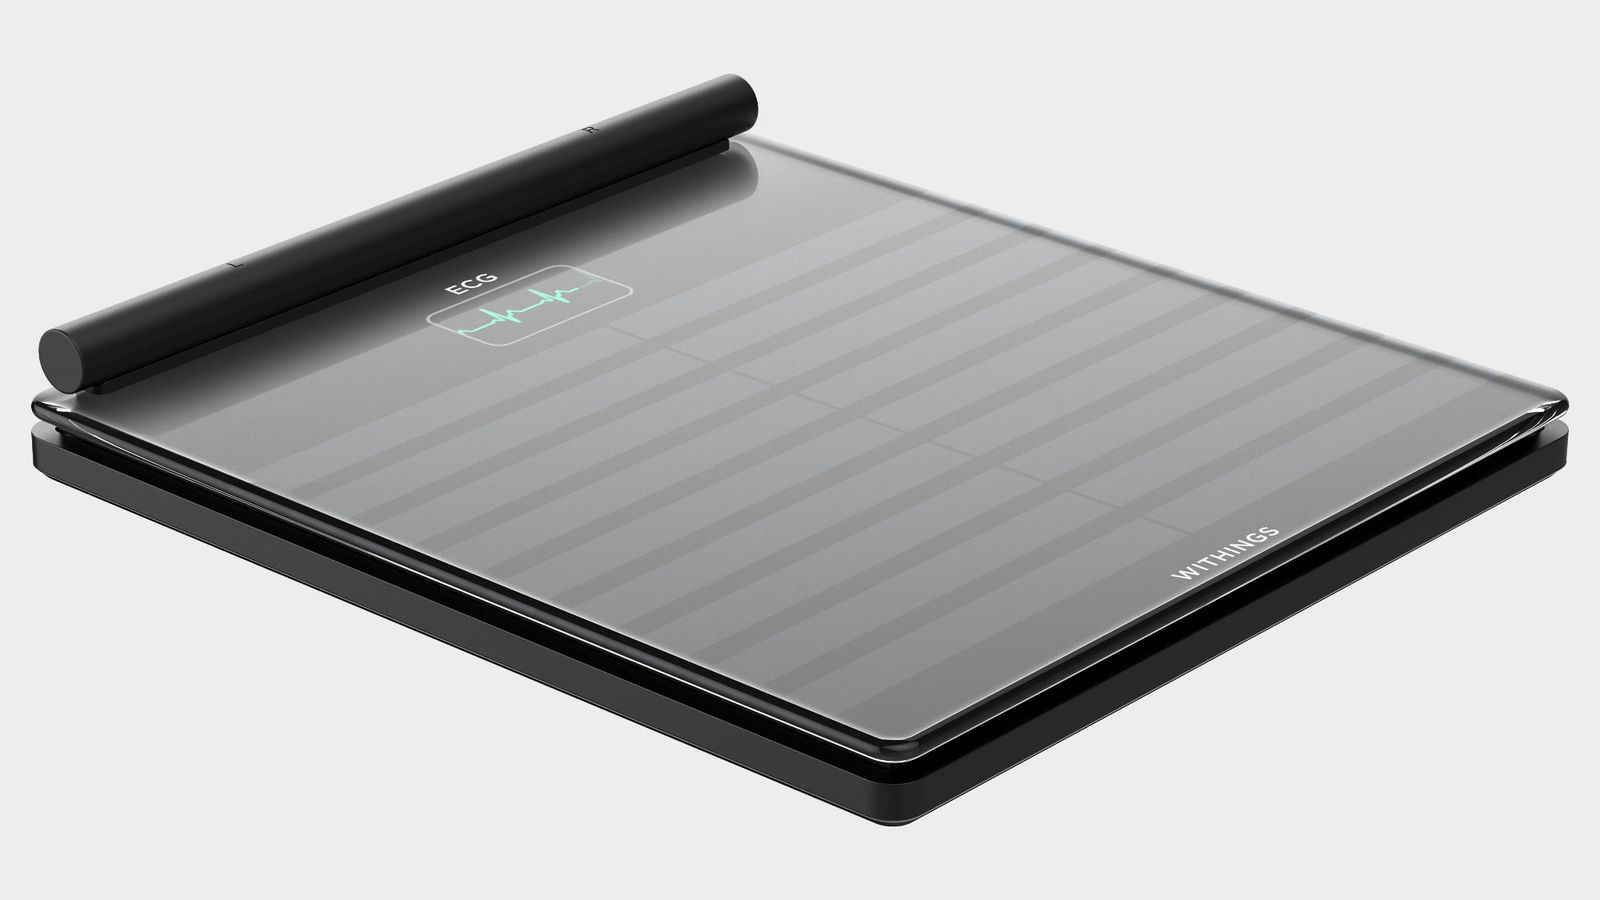 NEW] Say hello to our new scale: Body Smart! ⚖️ – Withings